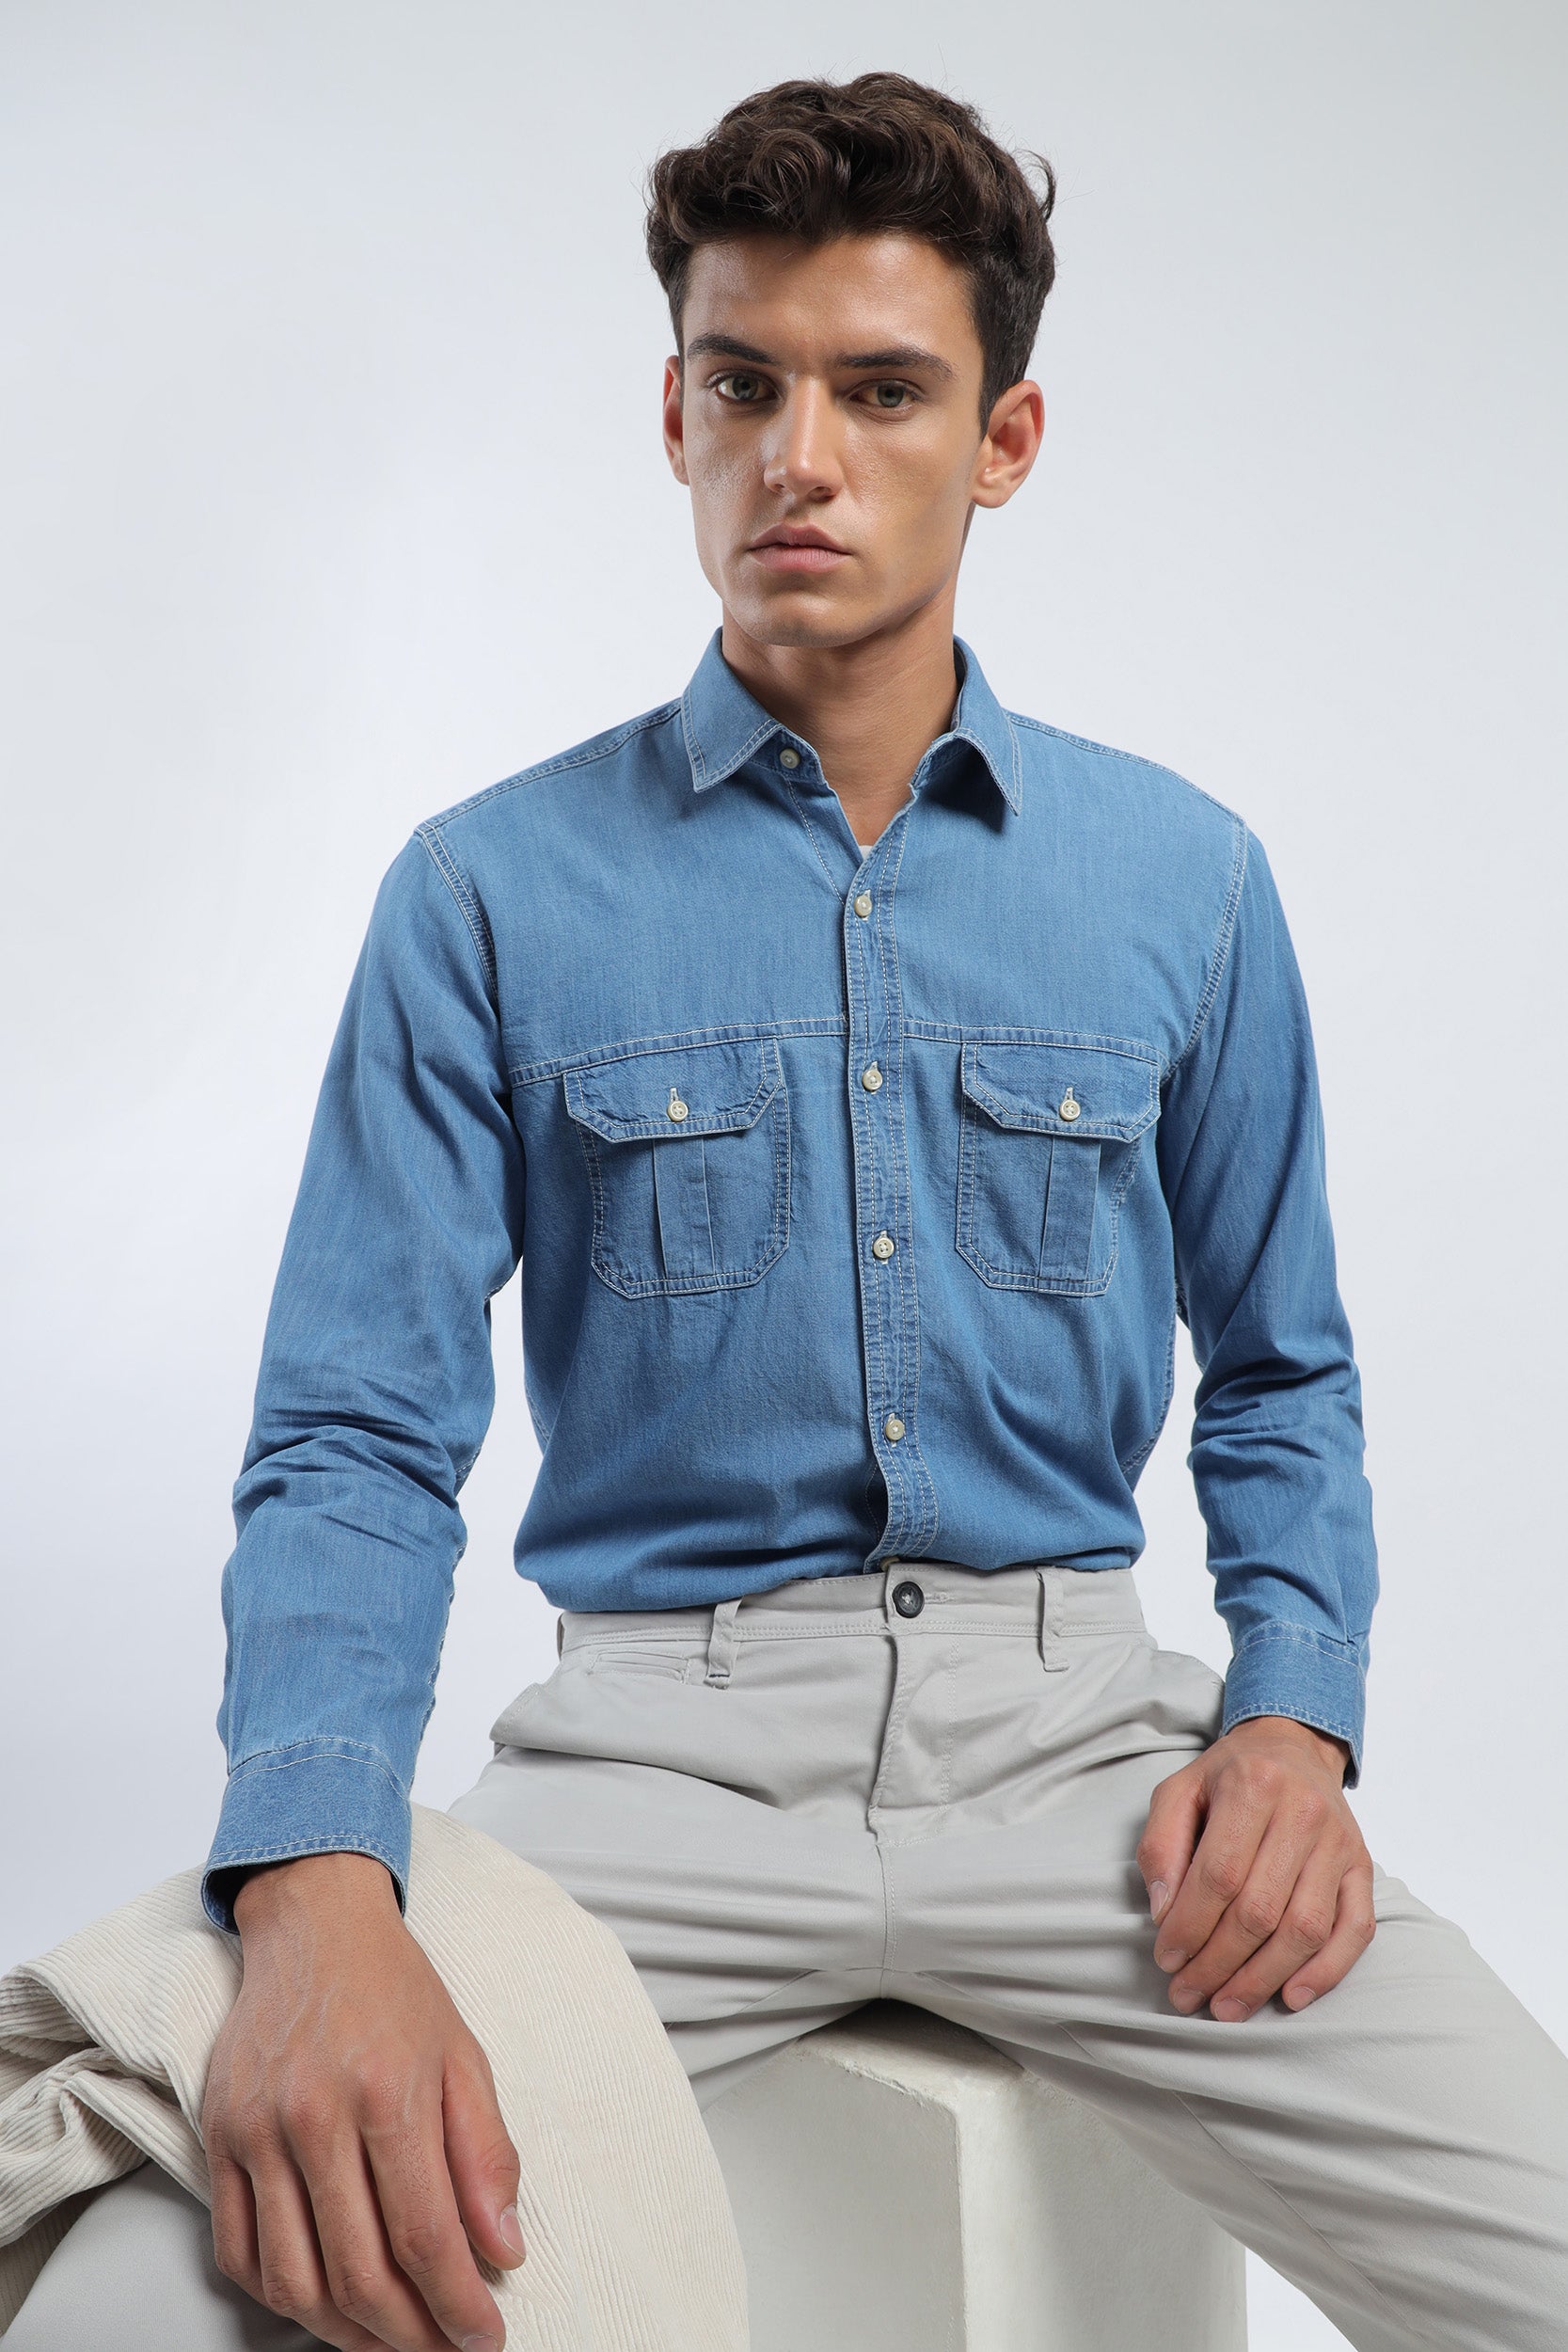 How To Wear A Denim Shirt With White Jeans  Ready Sleek